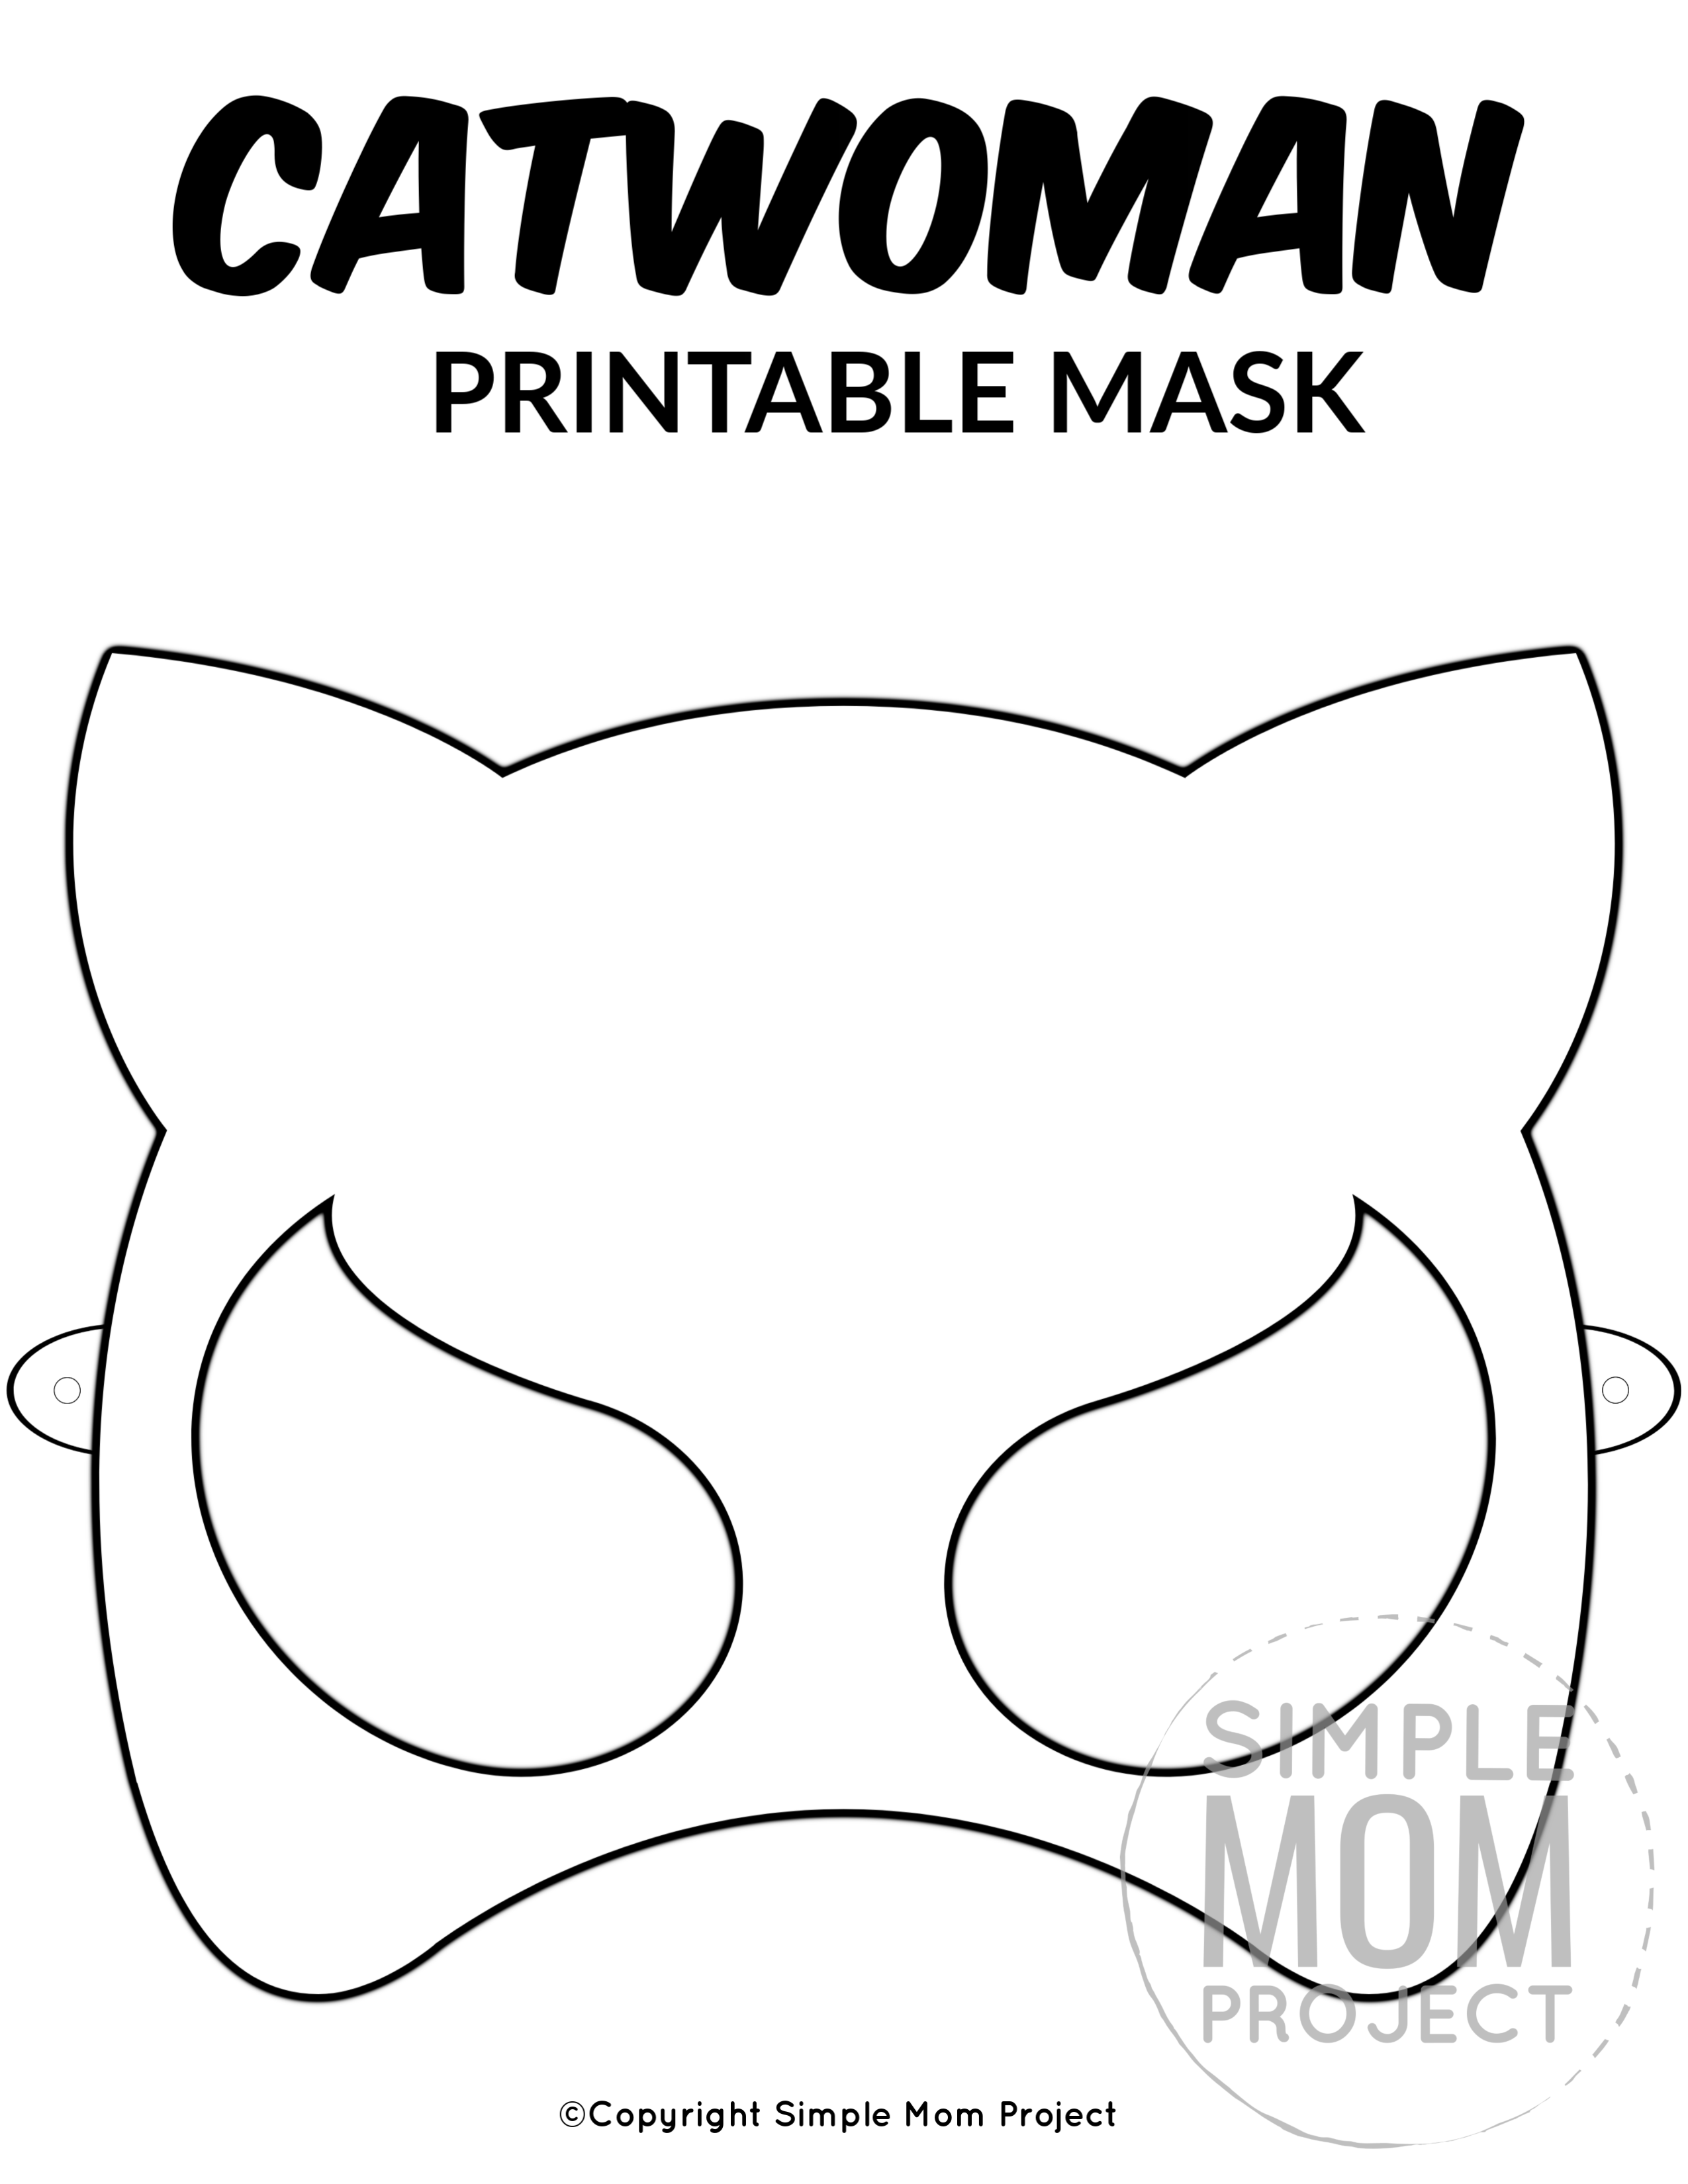 Free Printable Catwoman Mask Template - Simple Mom Project